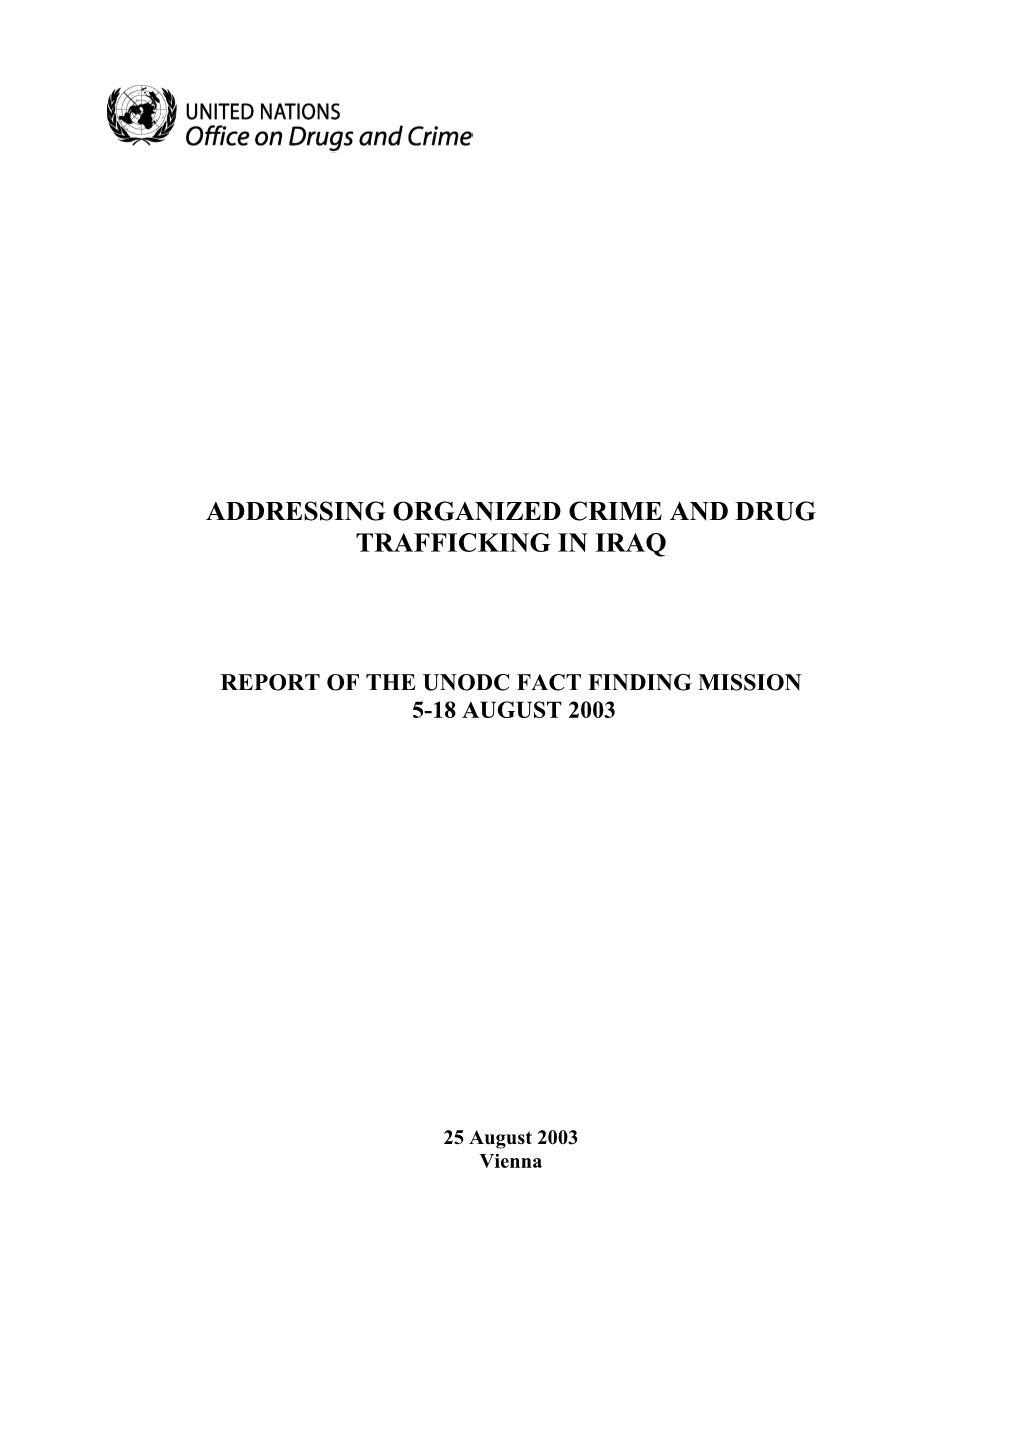 Addressing Organized Crime and Drug Trafficking in Iraq